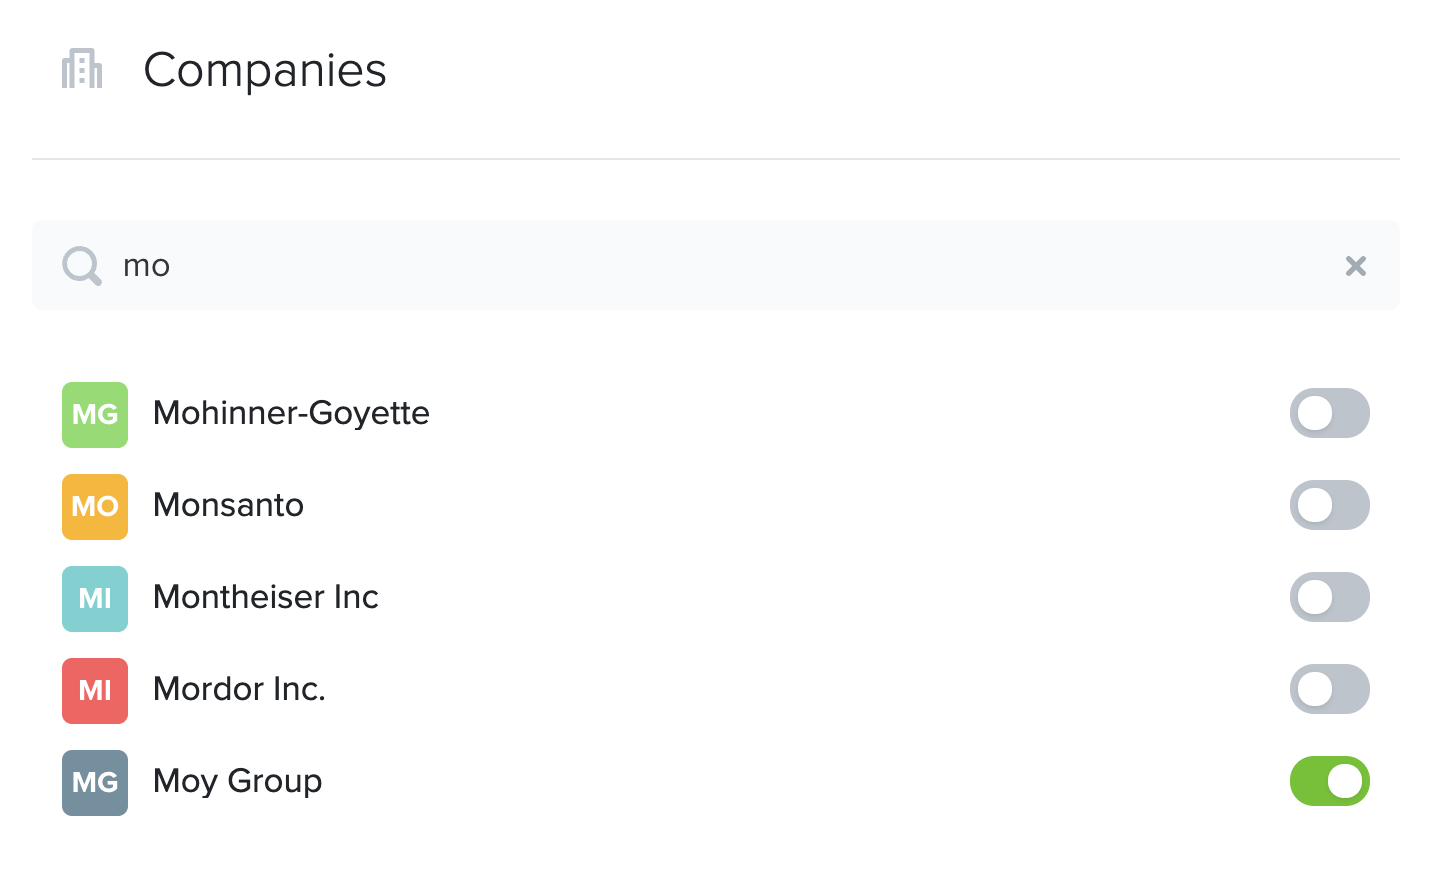 TR_Companies.png